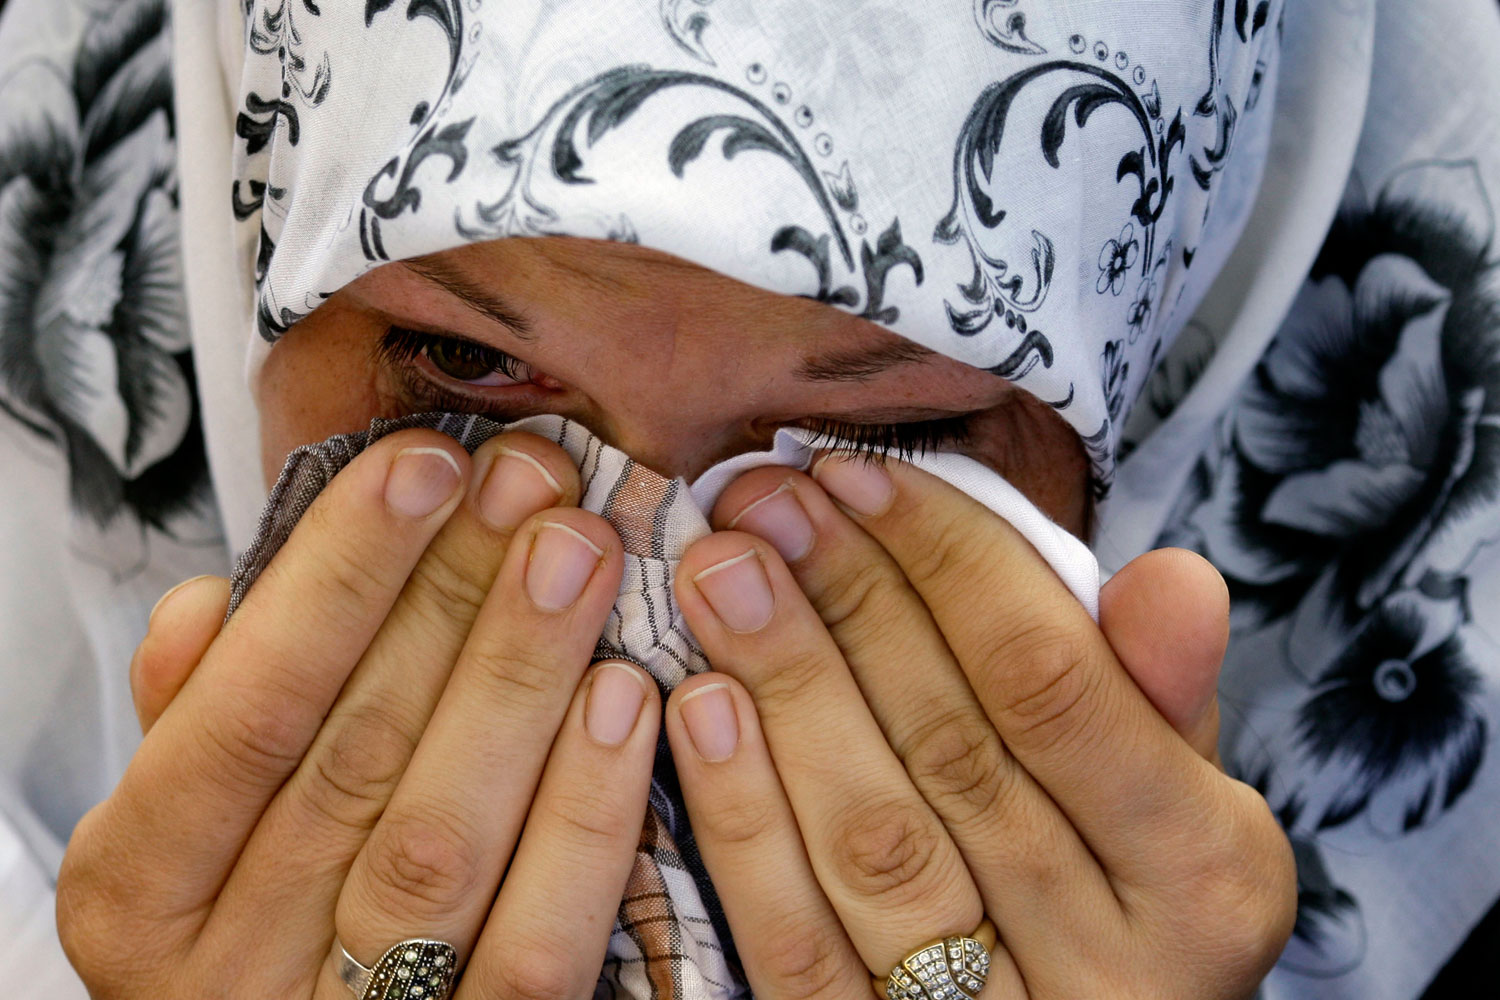 May 12, 2011.  A Bosnian Muslim woman reacts, near the  coffin of her relative during a mass funeral for Bosnian Muslims in Bratunac, 140 kms northeast from Sarajevo, Bosnia. Thousands of Bosnian Muslims attended at funeral of 16 men, women and children killed by Bosnian Serb forces at the beginning of the Bosnian 1992-95 war in Bosnian town of Bratunac. All of the bodies were found and exhumed from a mass grave and identified by DNA method.